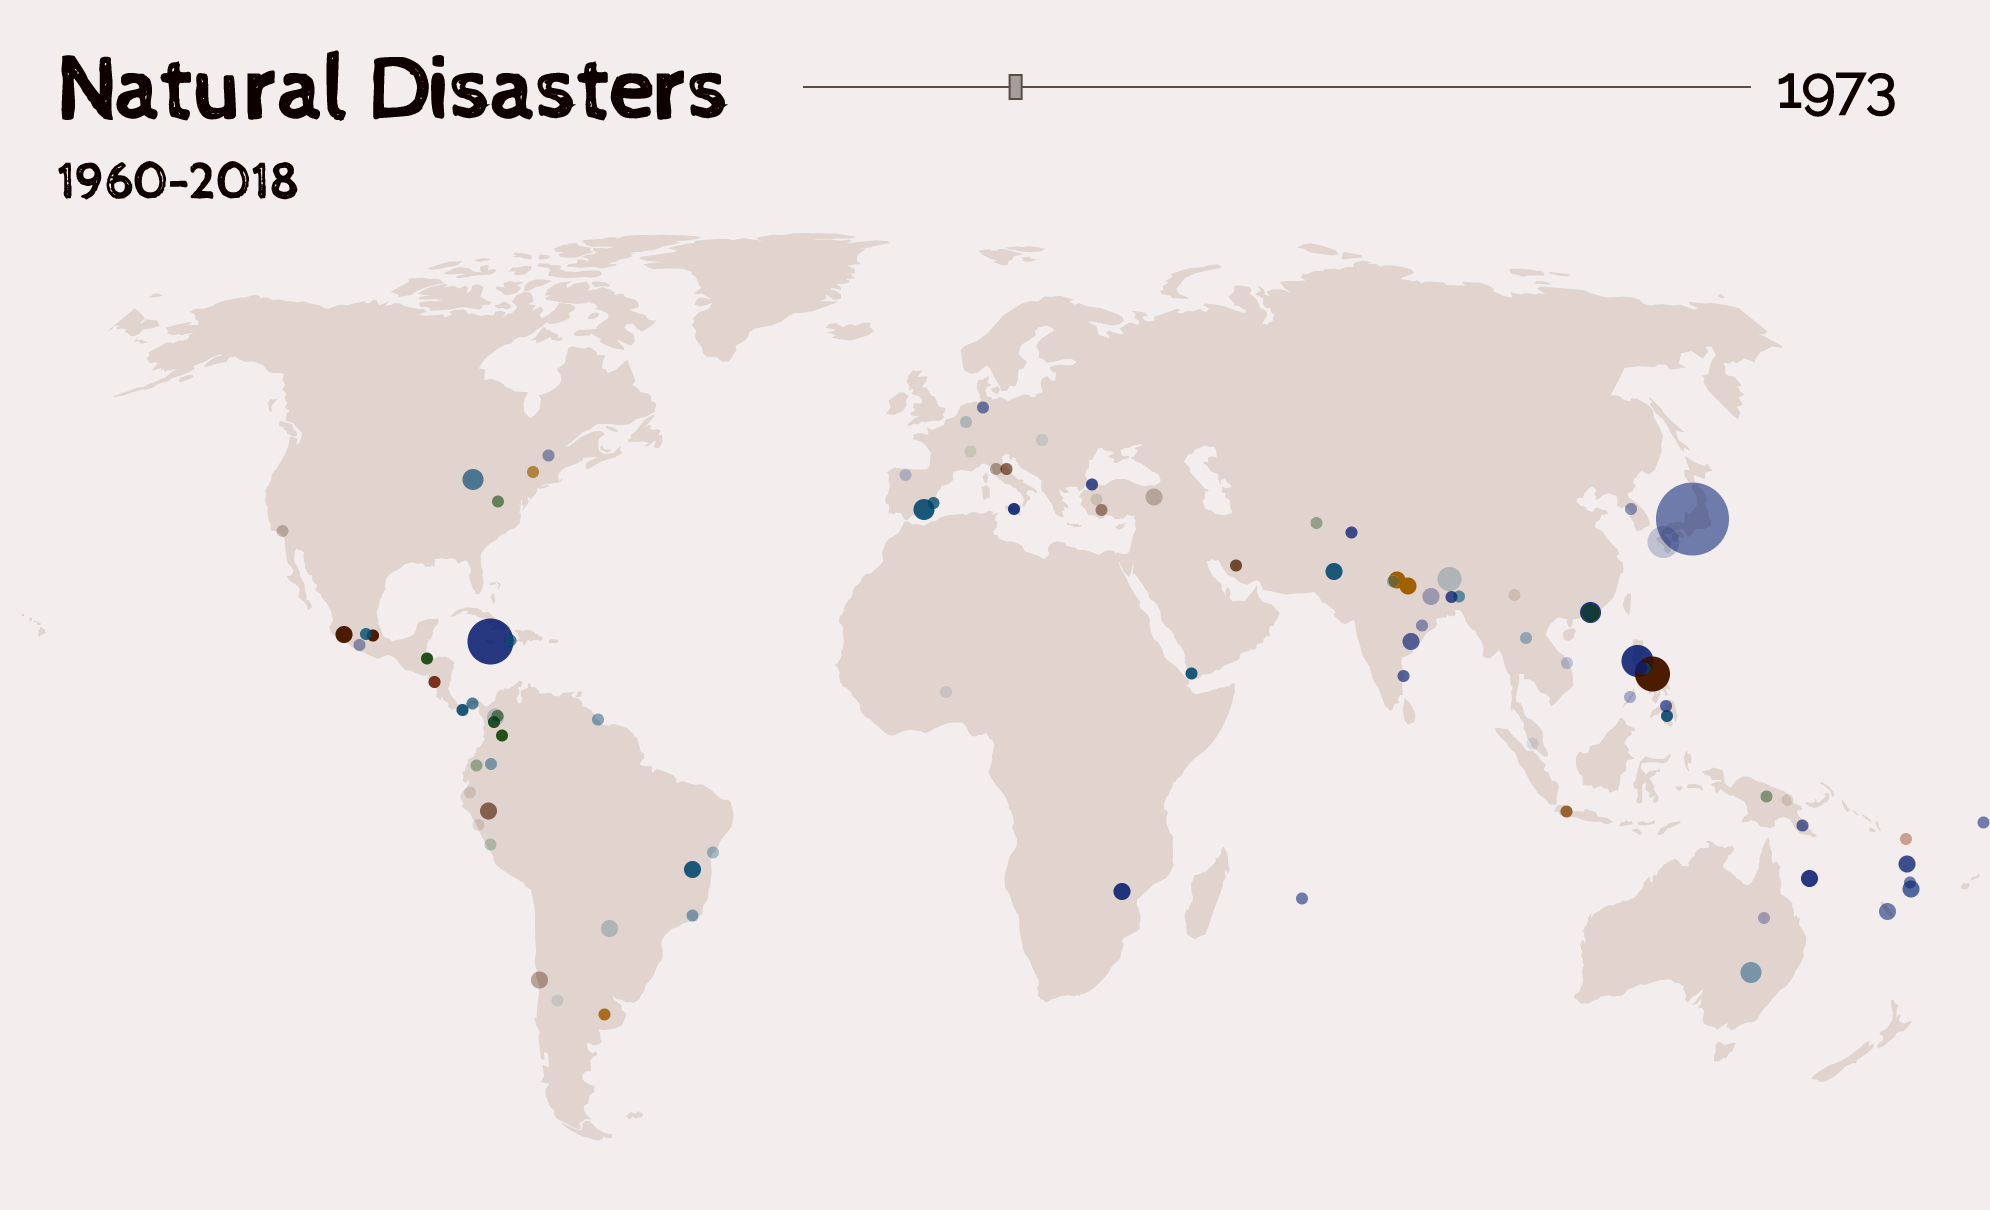 An exploration of natural disasters across the world told in scrollytelling style and utilizing d3, canvas and svg